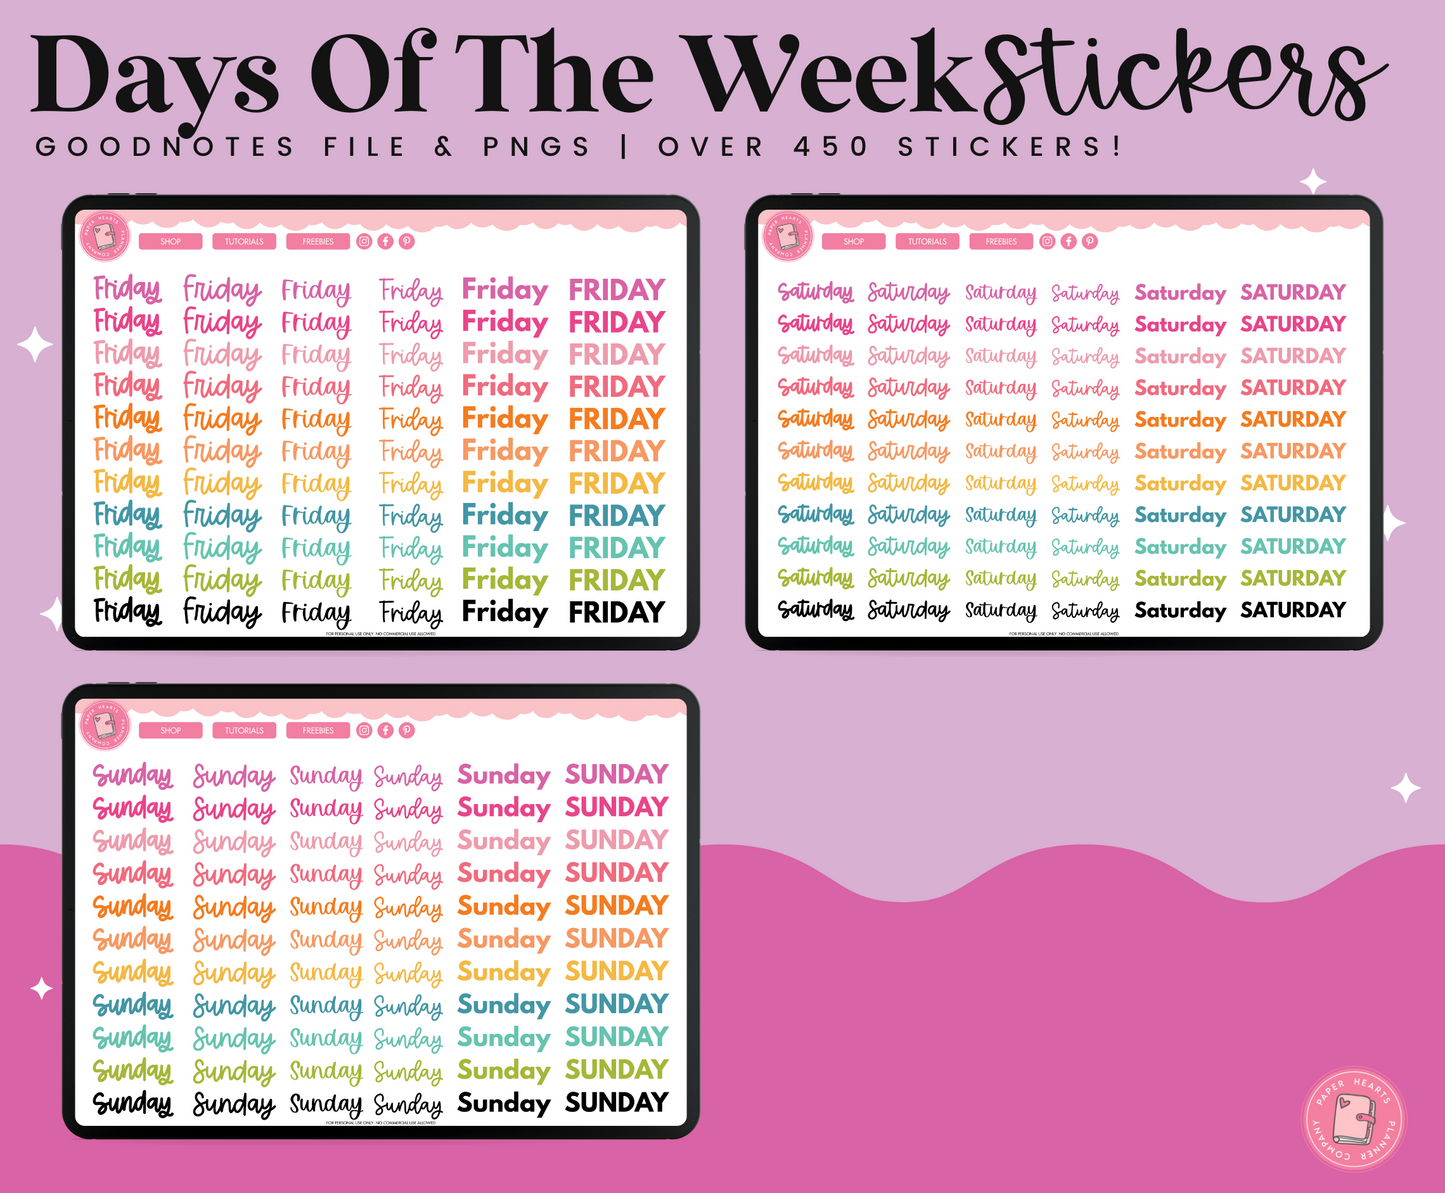 Days Of The Week Stickers